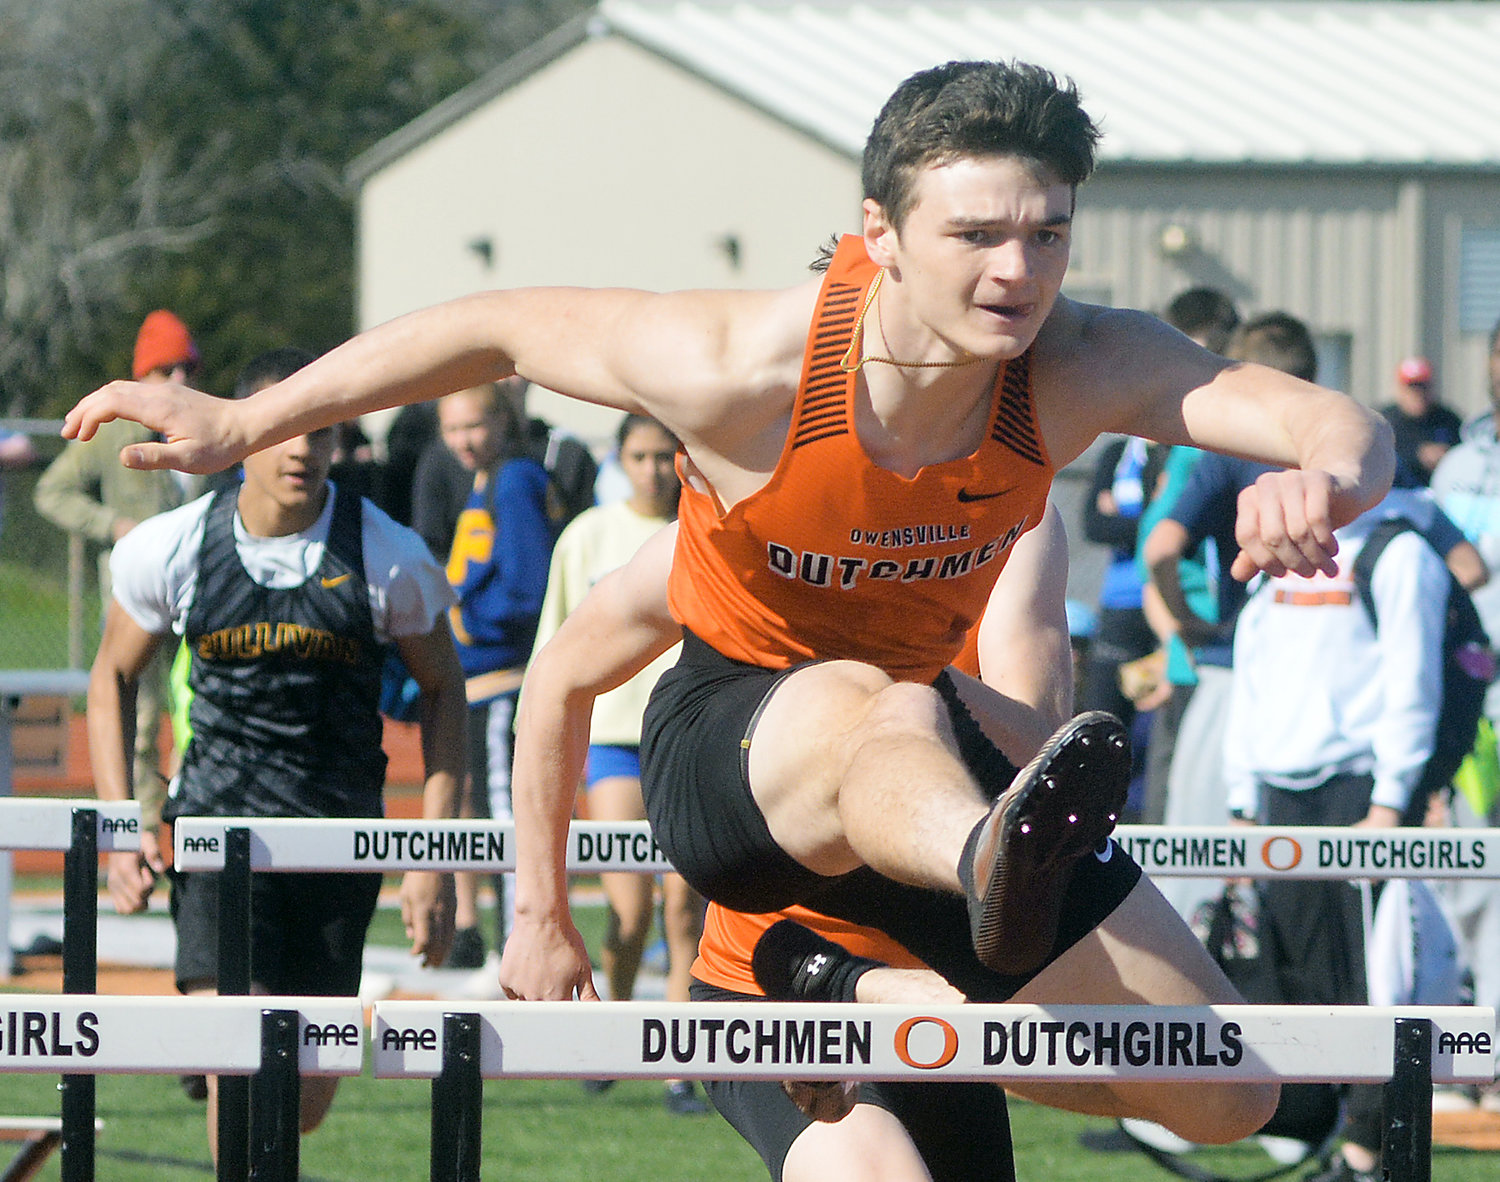 Alan Kopp clears a hurdle on his way to winning the boys 110-meter hurdles at the OHS Relays.